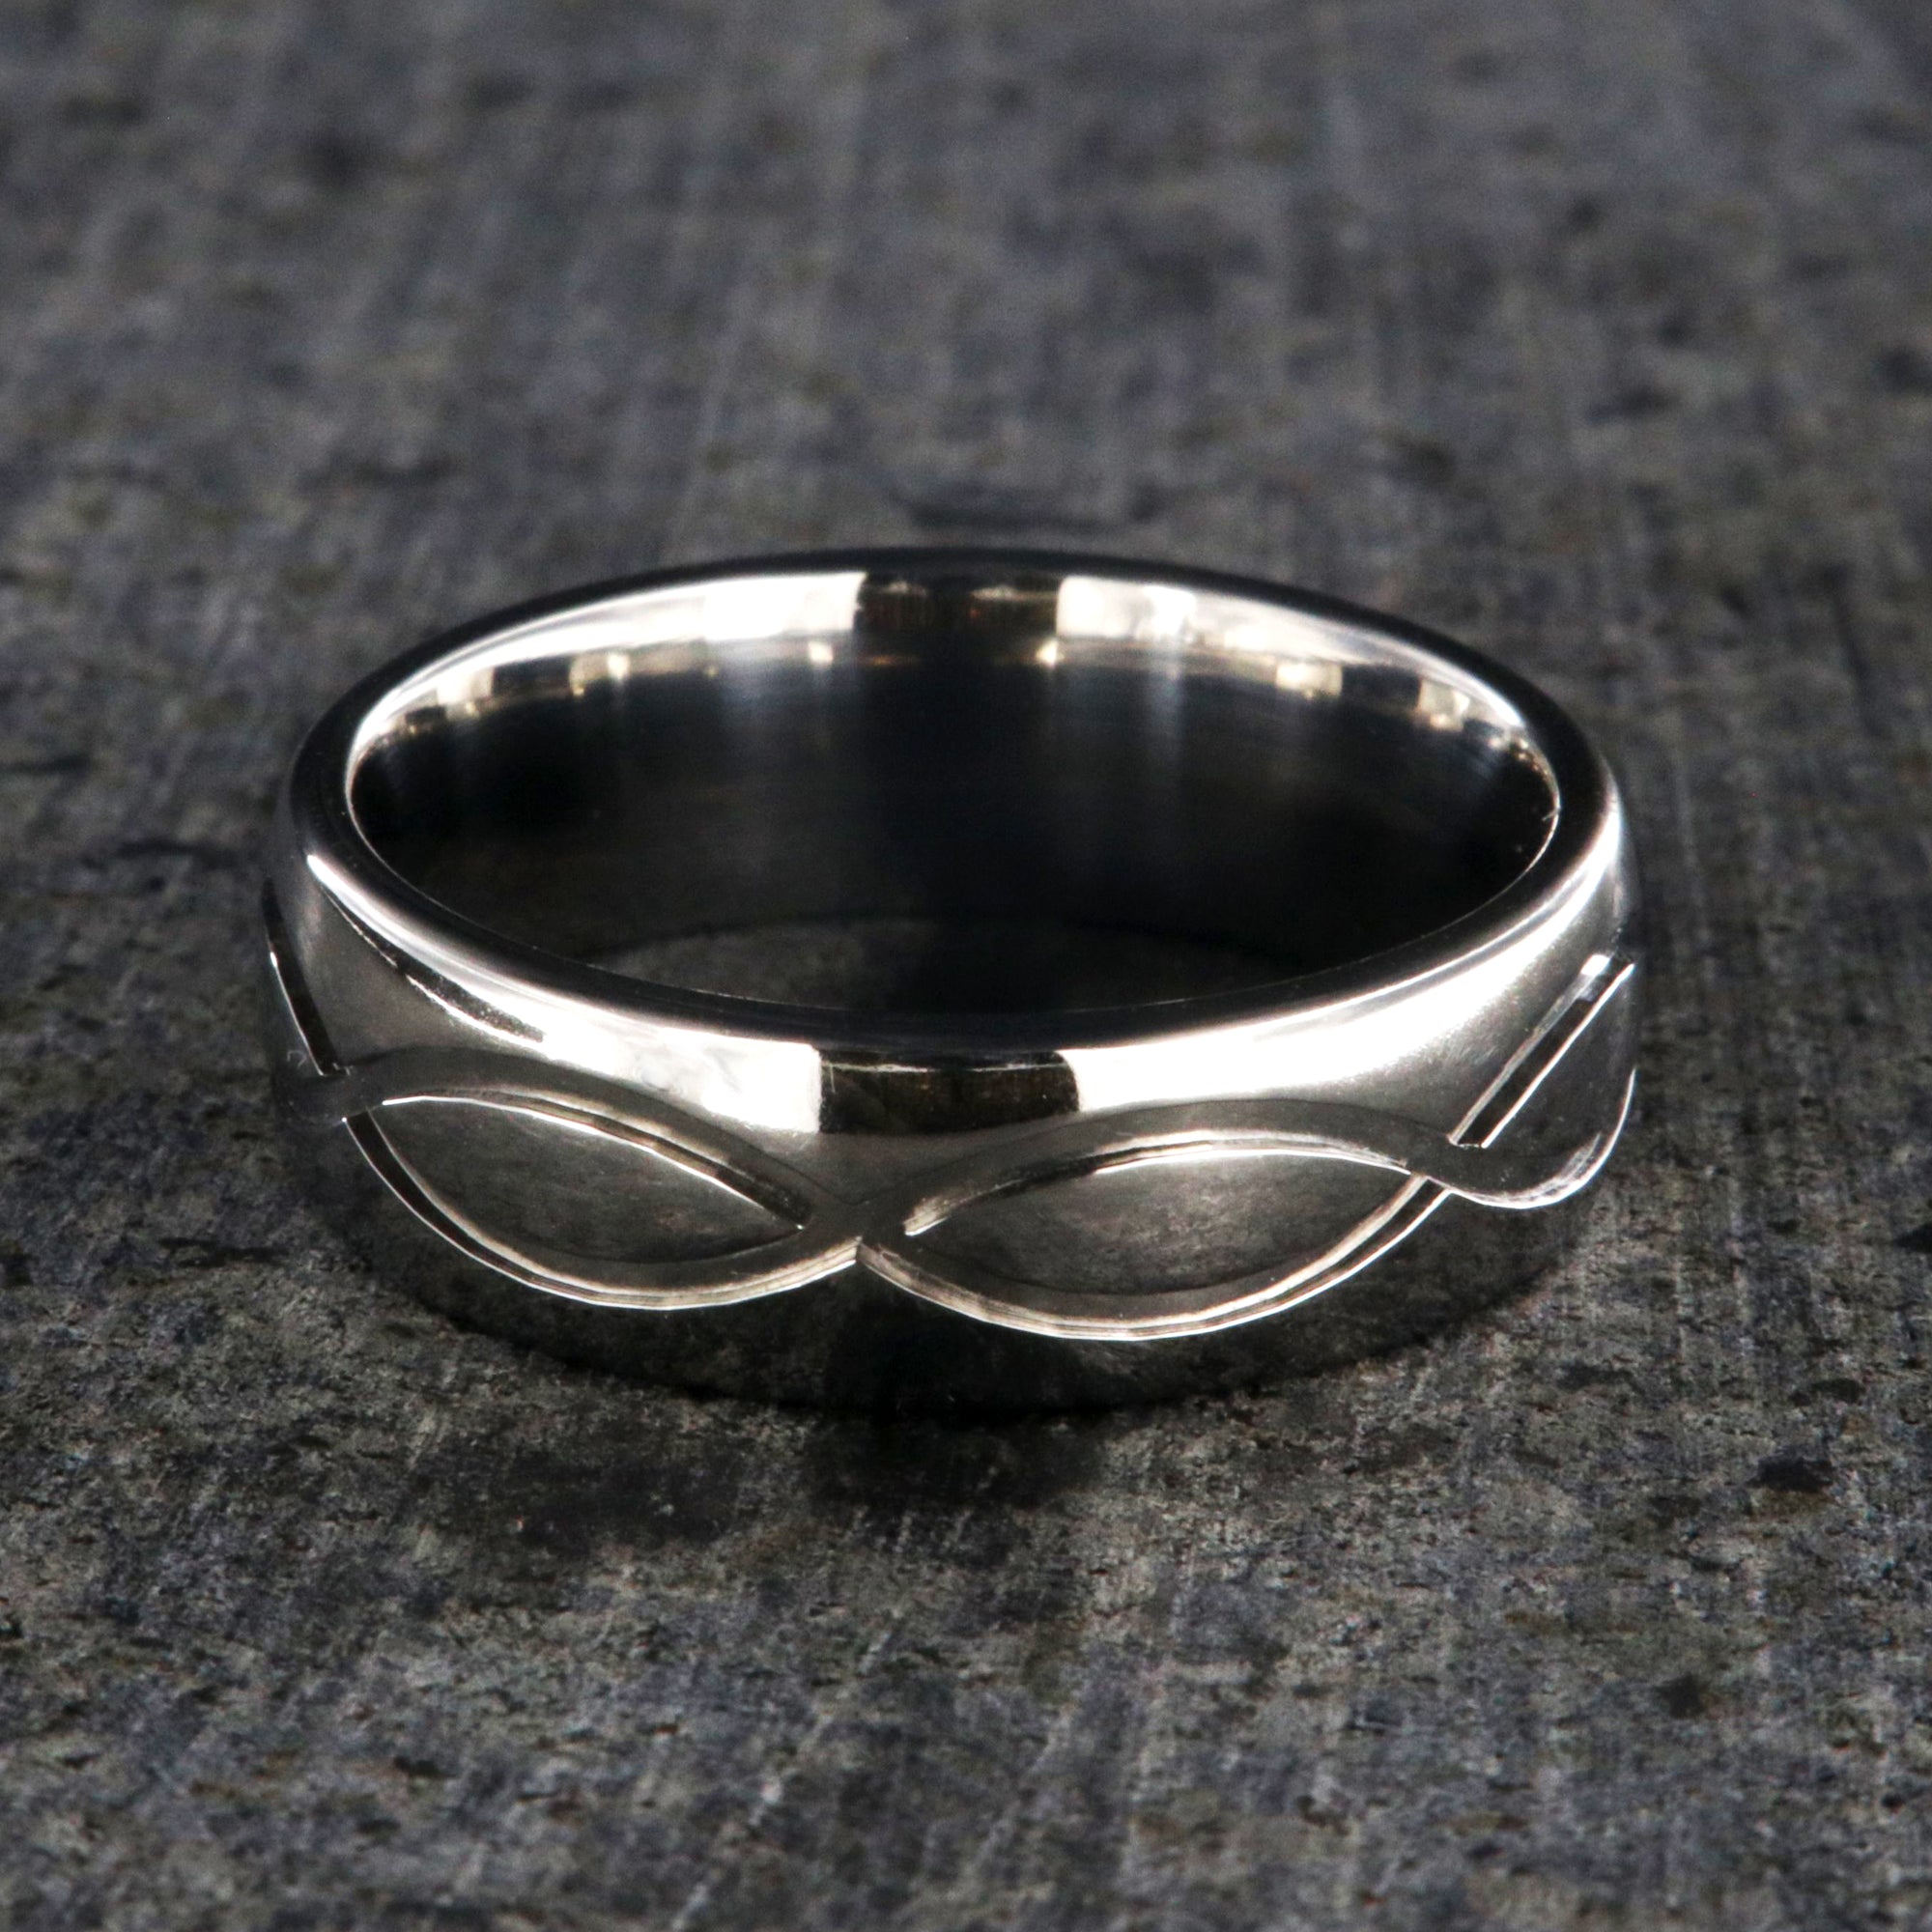 7mm wide infinity titanium wedding band with a rounded profile